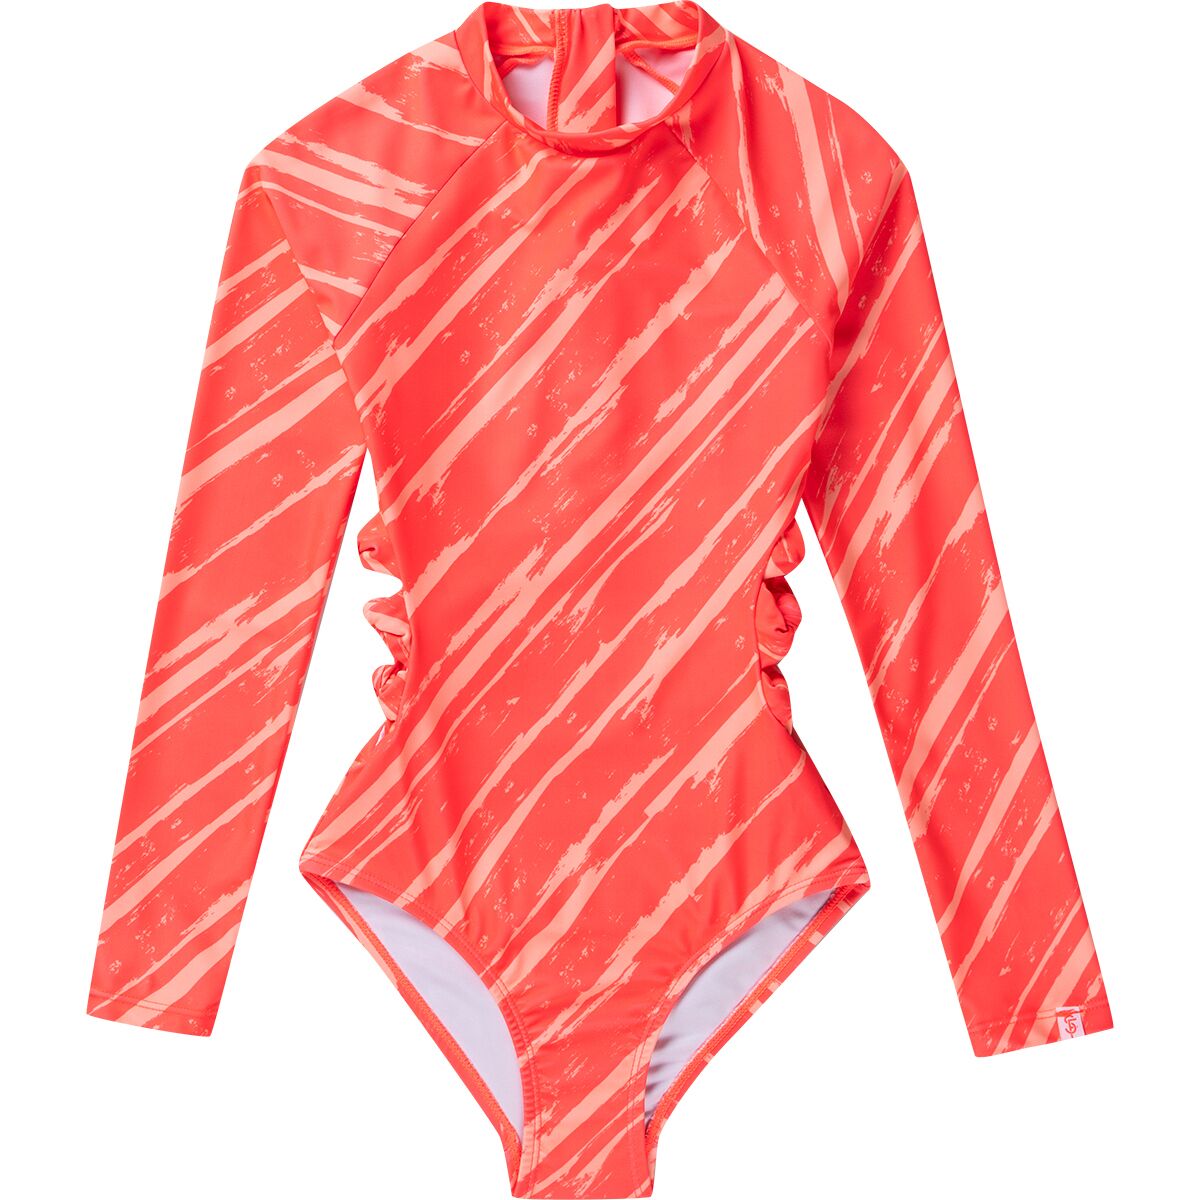 Seafolly Palm Cove Knot Side Paddlesuit - Girls'